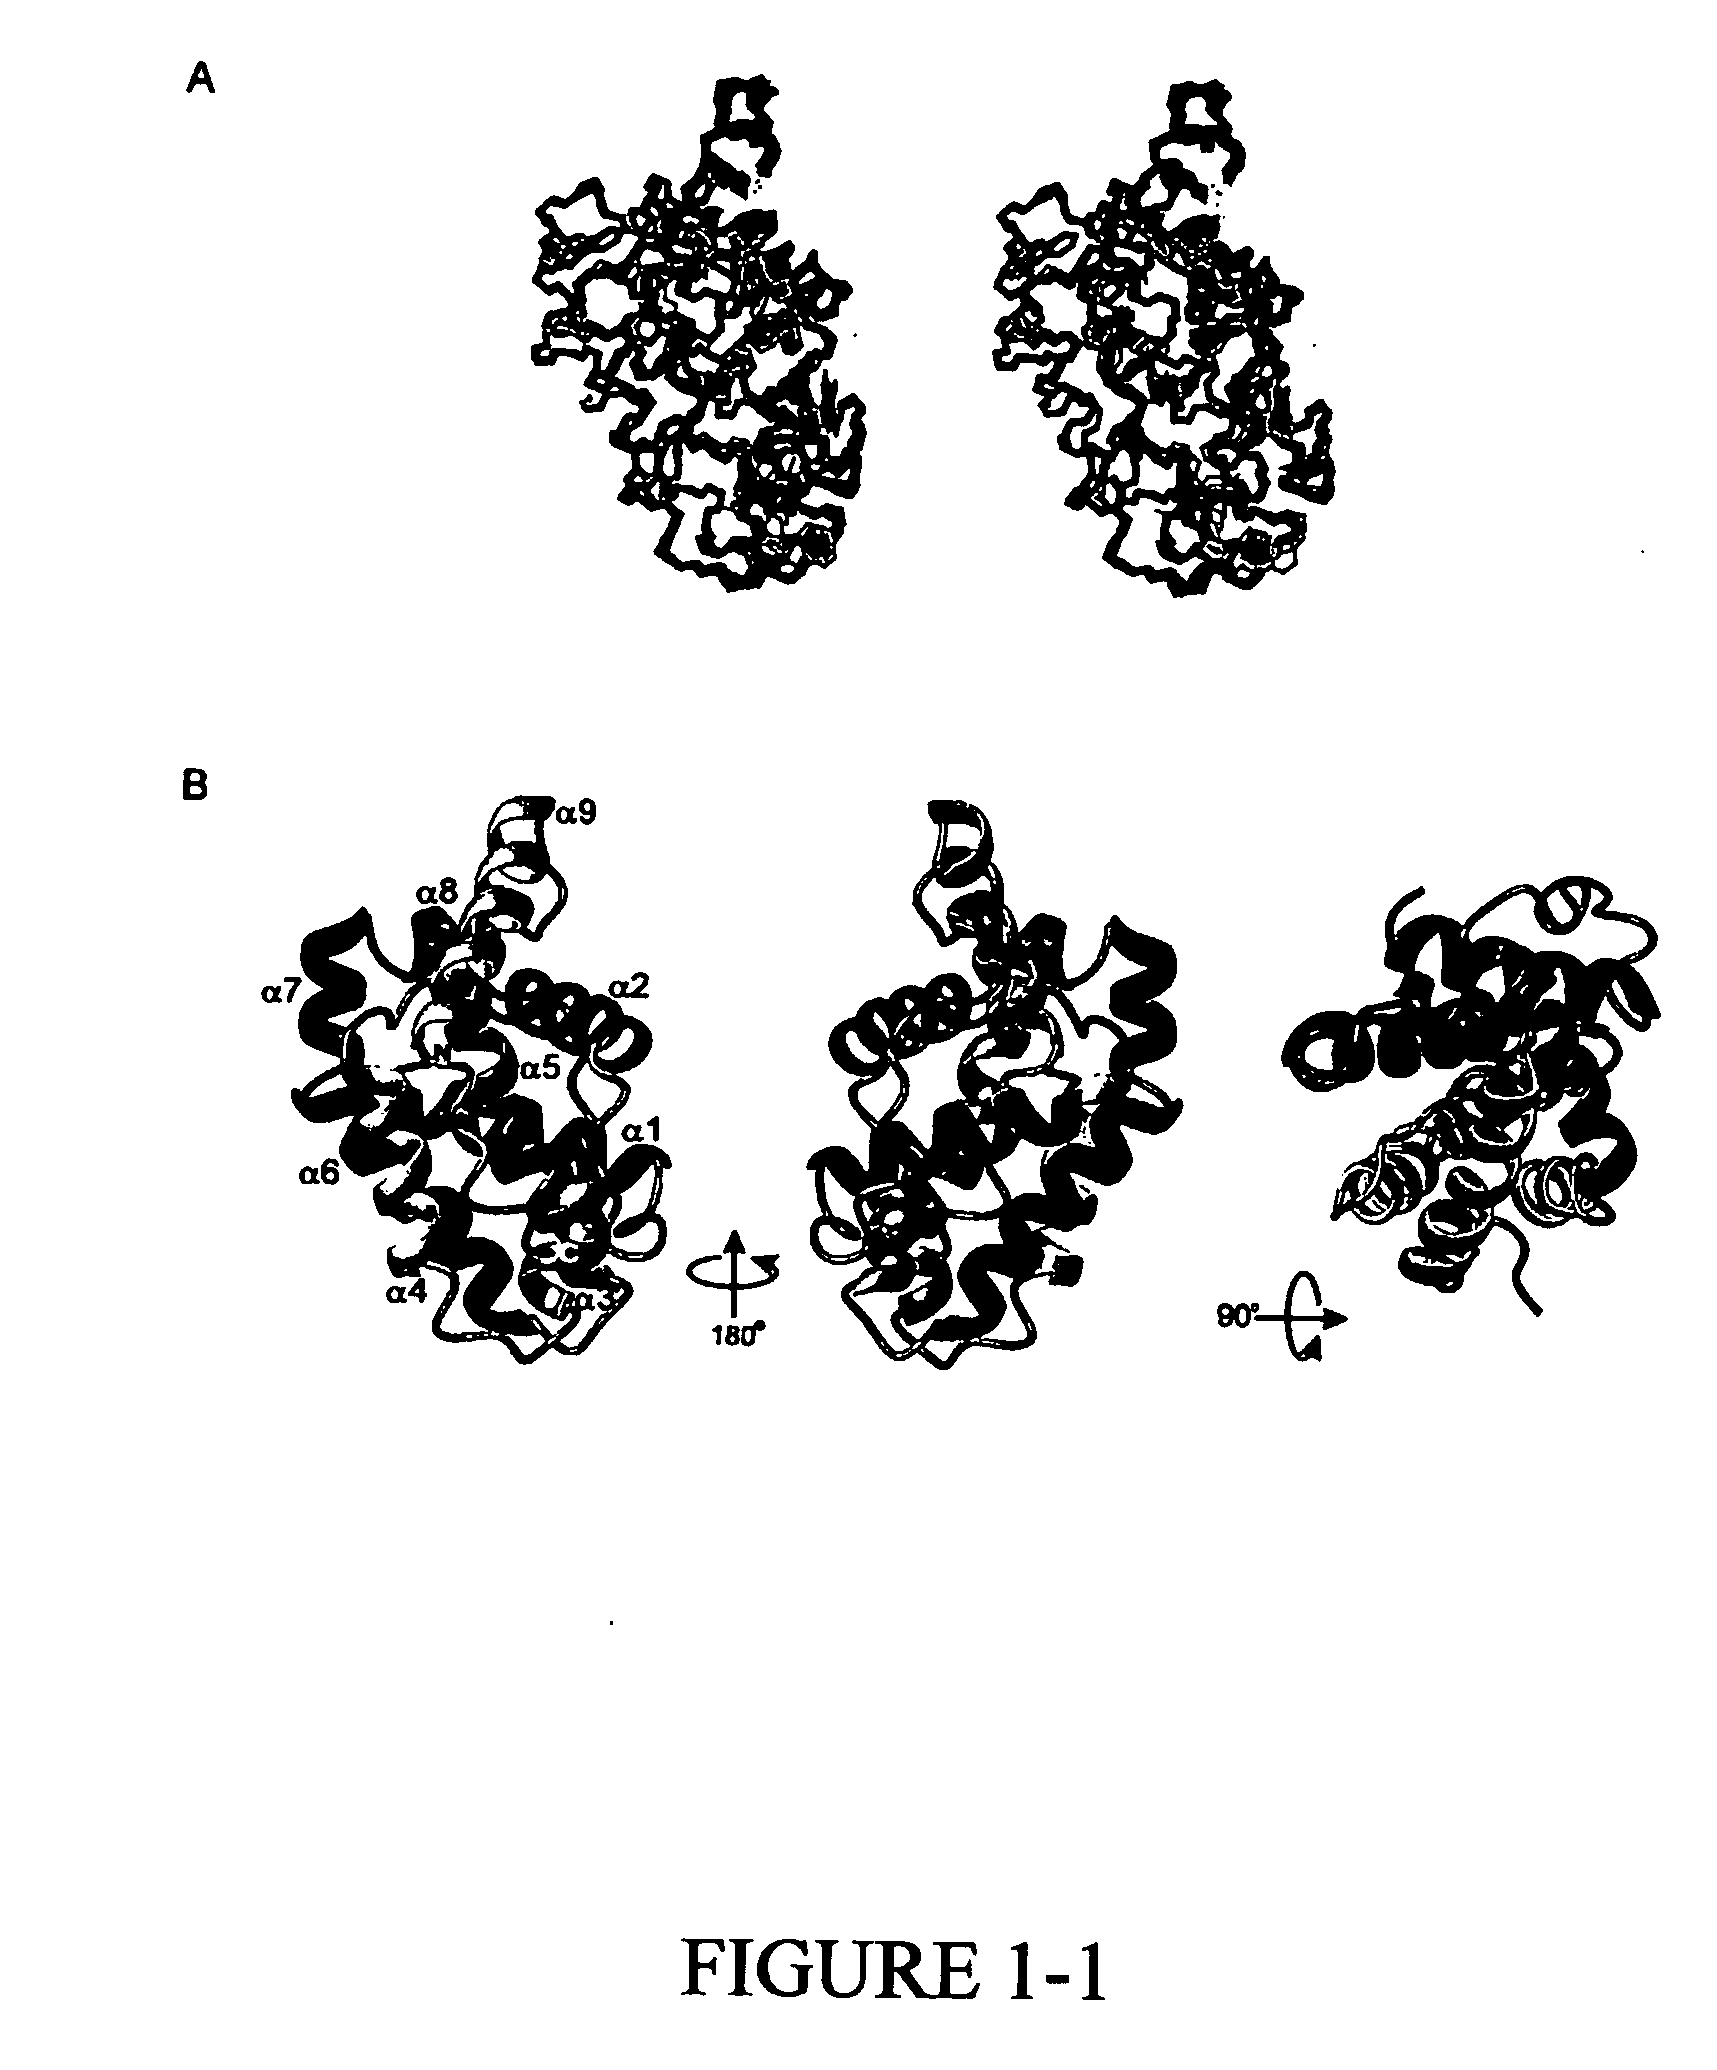 Bcl-w structure and uses therefor